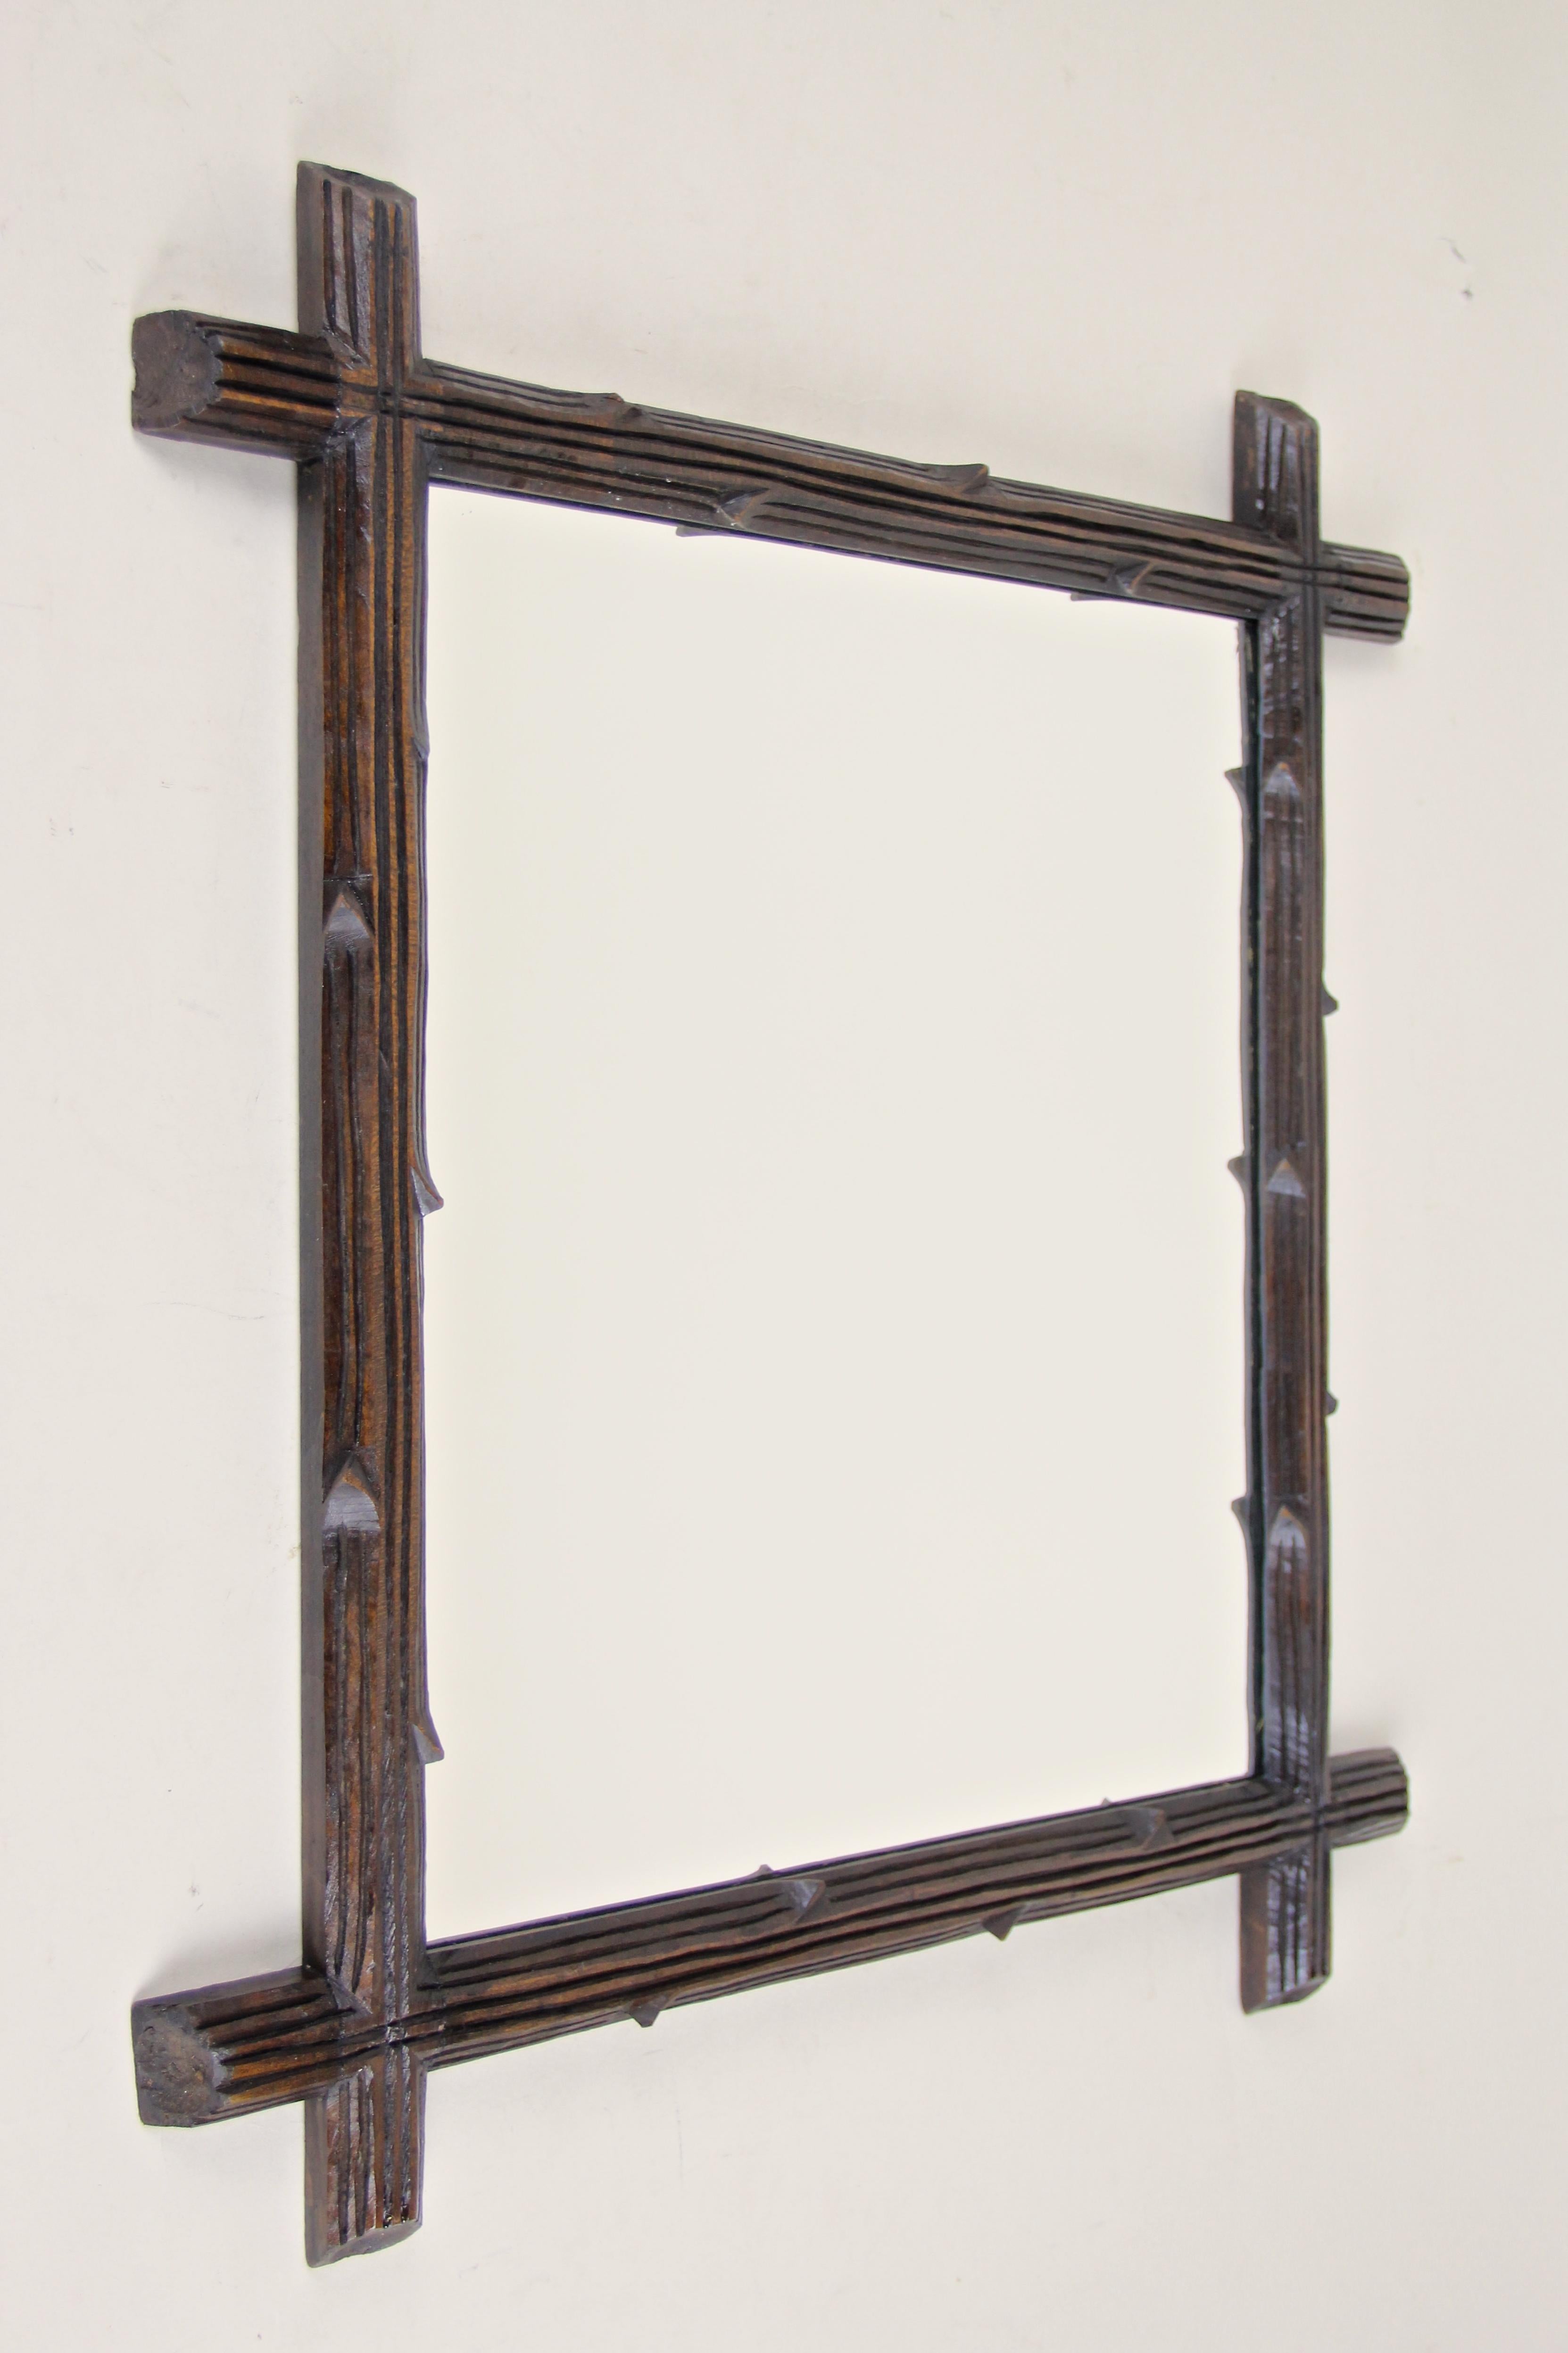 Mid-sized rustic Black Forest wall mirror from Austria, circa 1880. Beautifully hand carved out of basswood this late 19th century wall mirror shows a tree branch styled frame combined with a dark brown/ black surface which was sealed by a mat